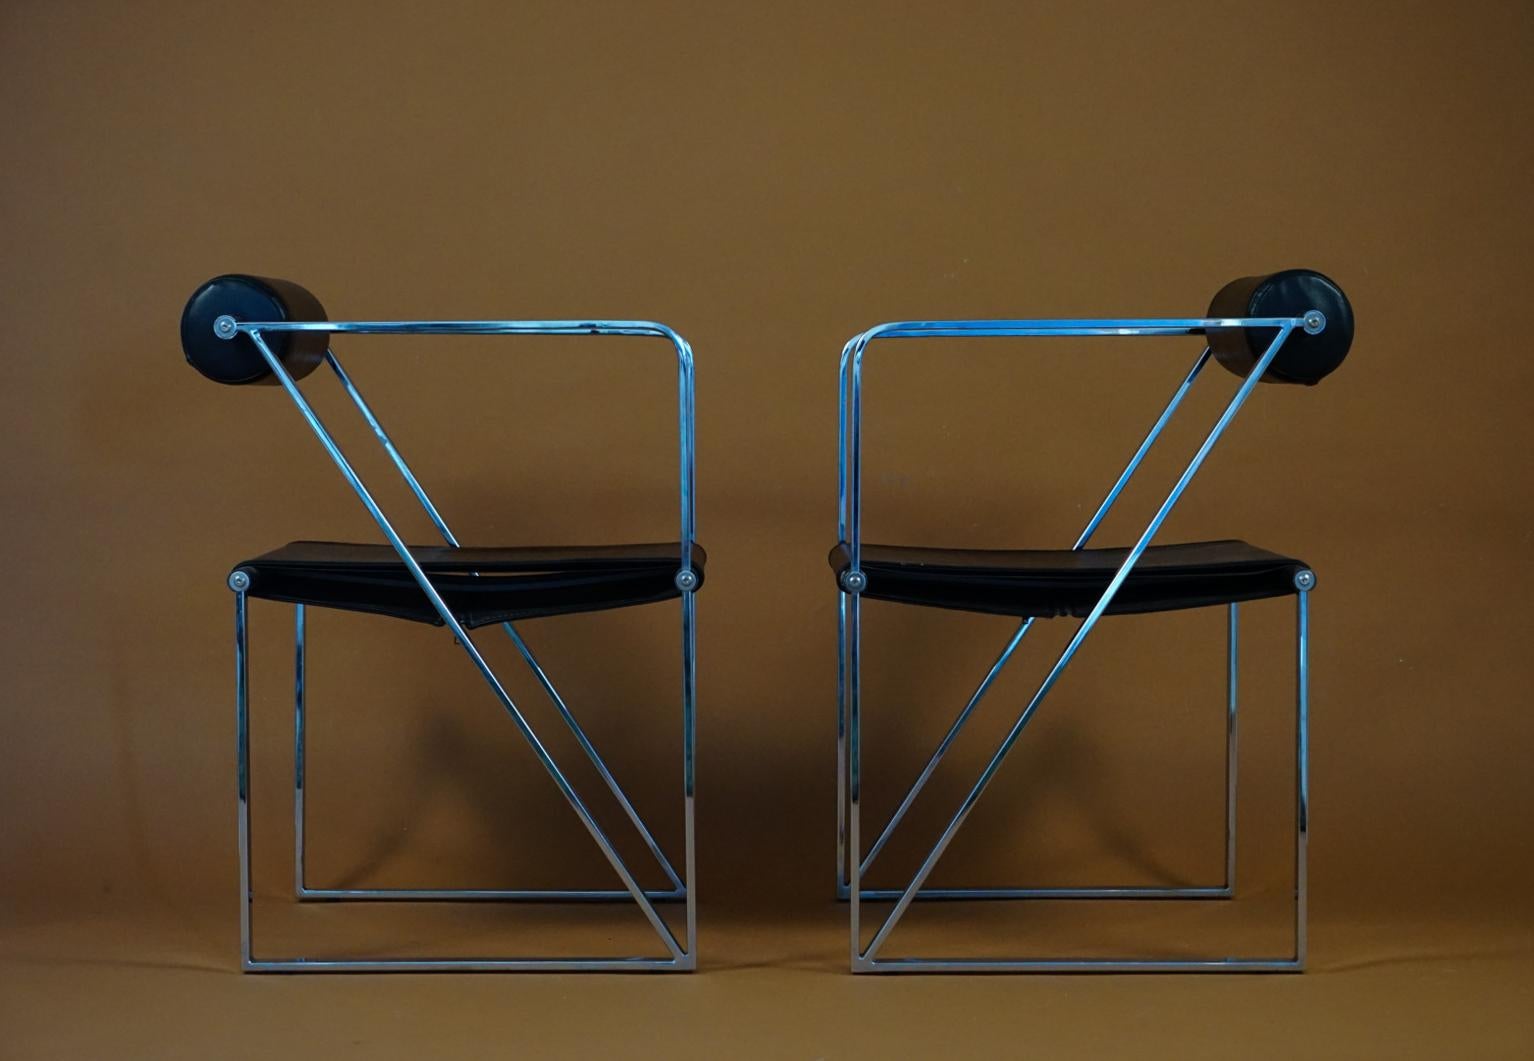 Mario Botta Seconda Metal - Chrome armchairs Memphis for Alias Italy, 1982 edition with chrome and black leather is a rare version of the Iconic Seconda Mario Botta char. The Seconda armchair was designed by Mario Botta in 1982. Geometric shapes